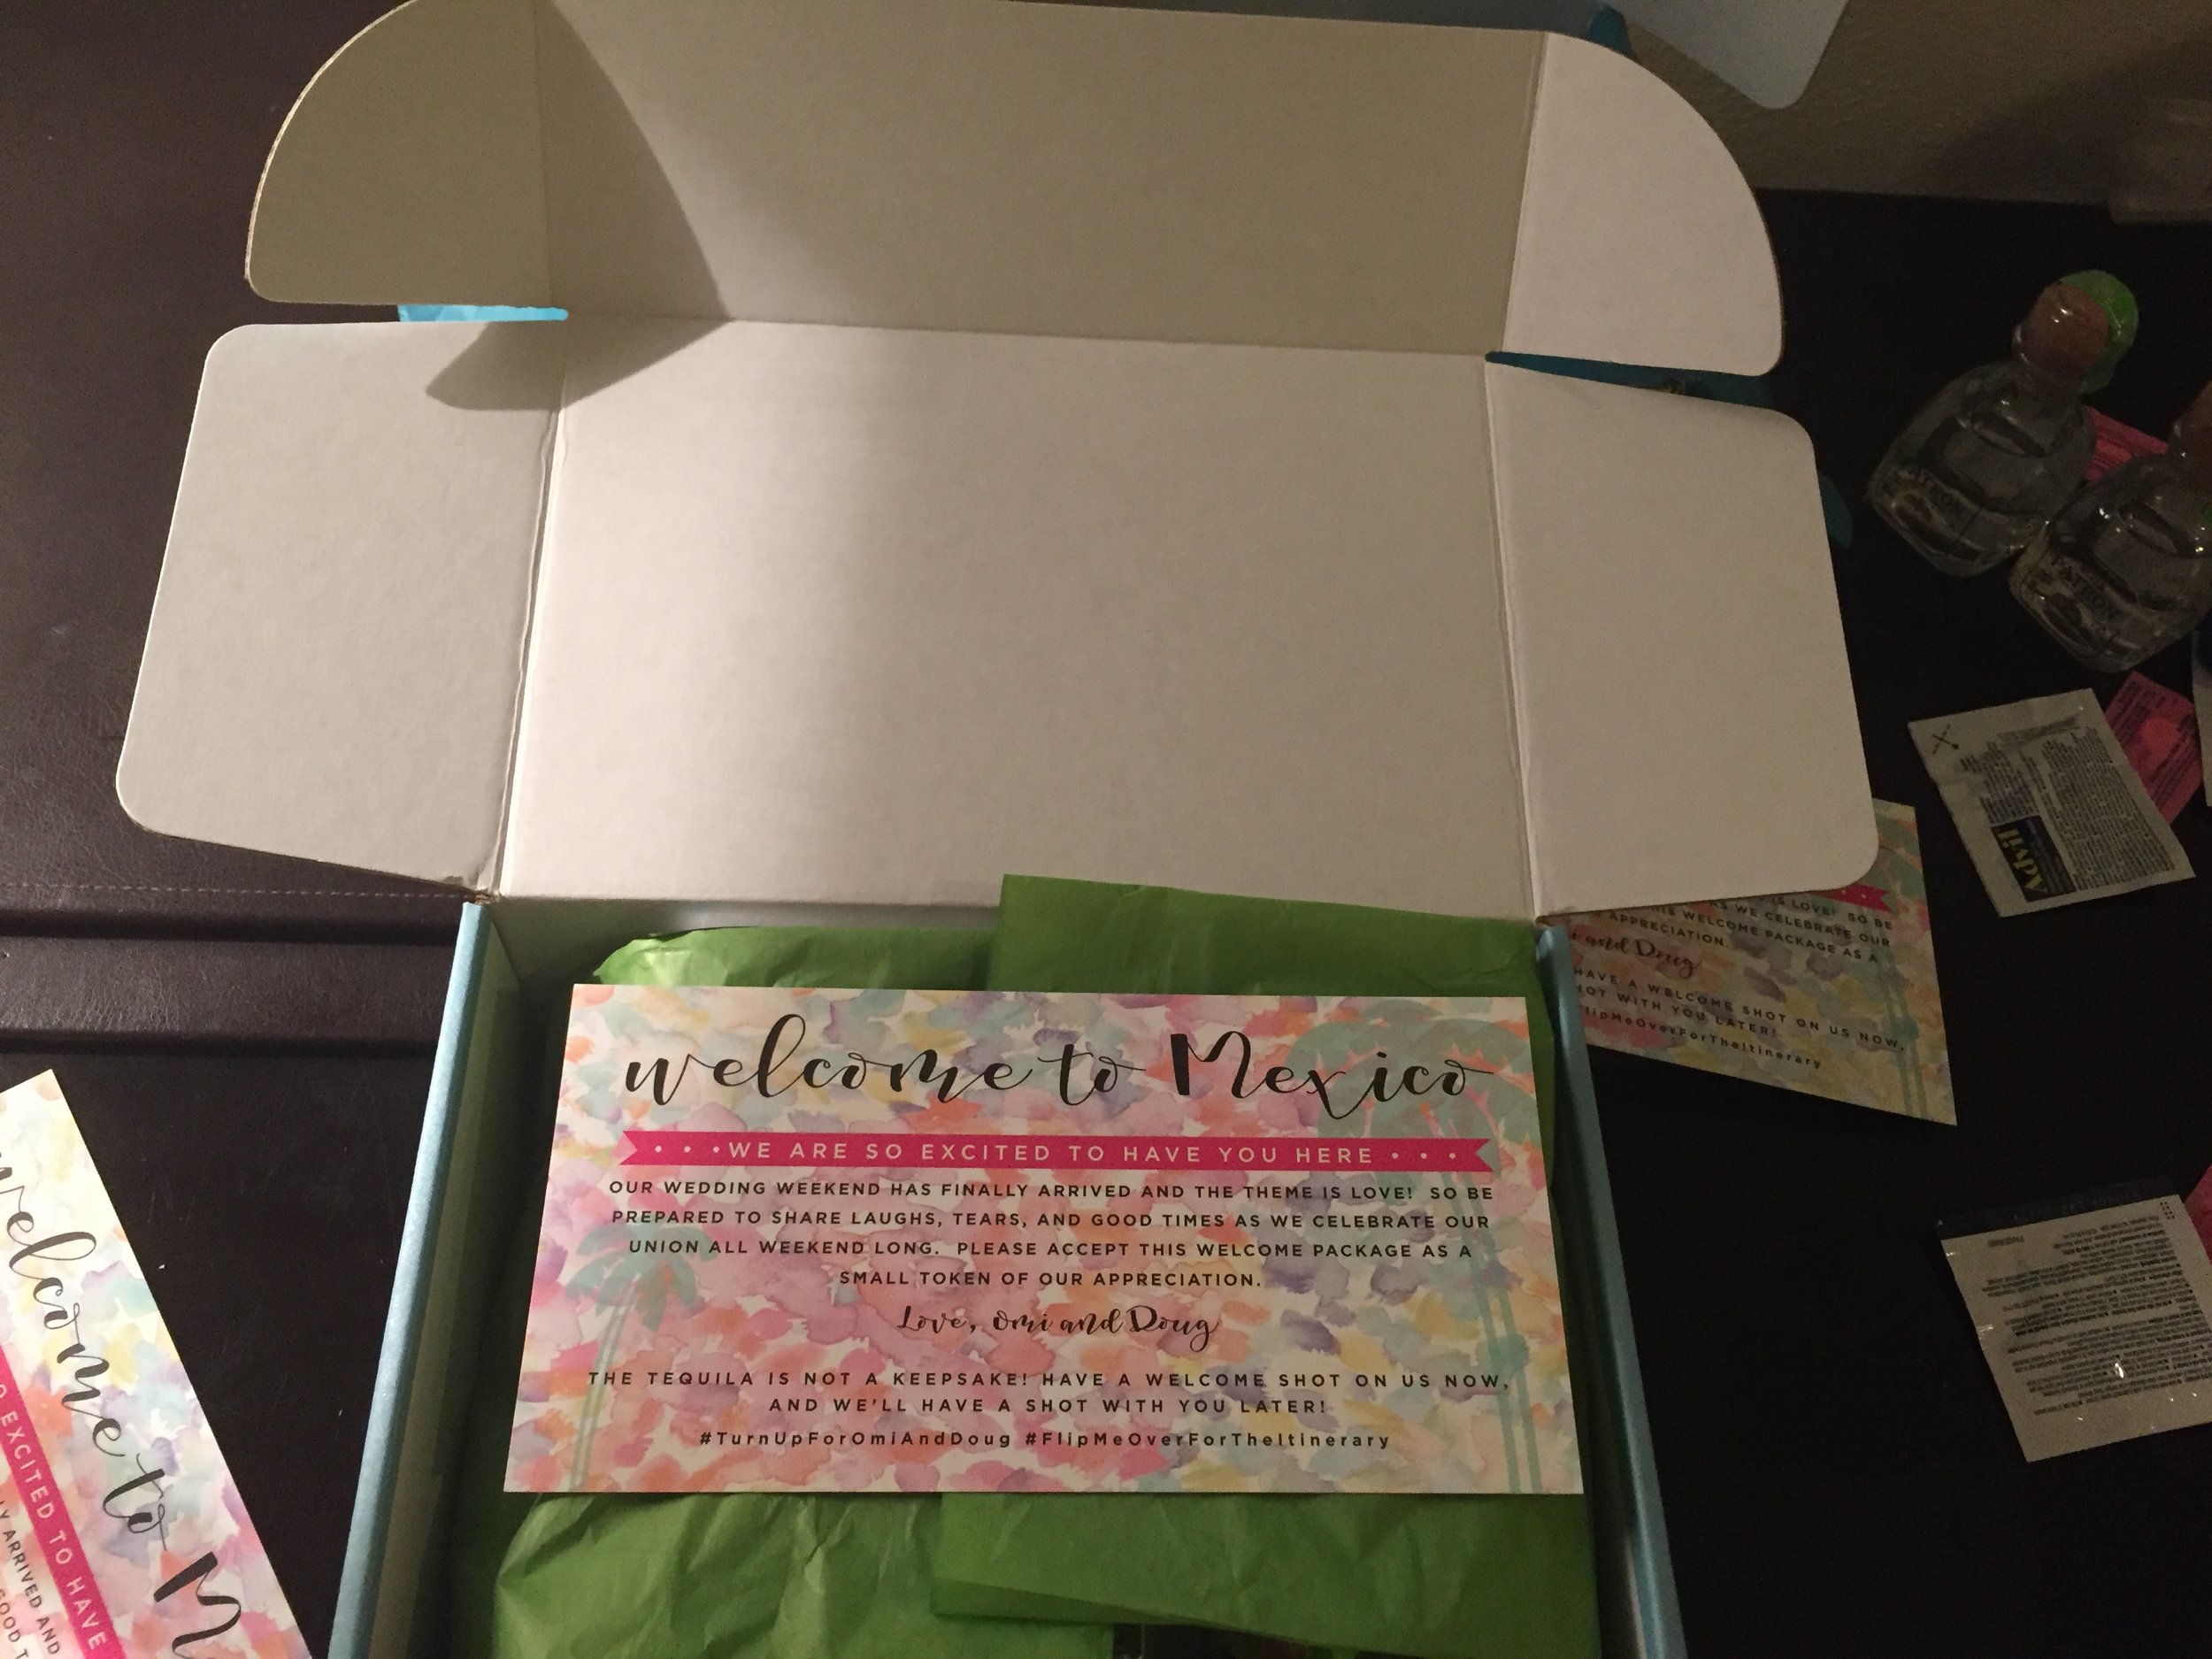 Copy of BlackDesti's Welcome Box - Inside/Top